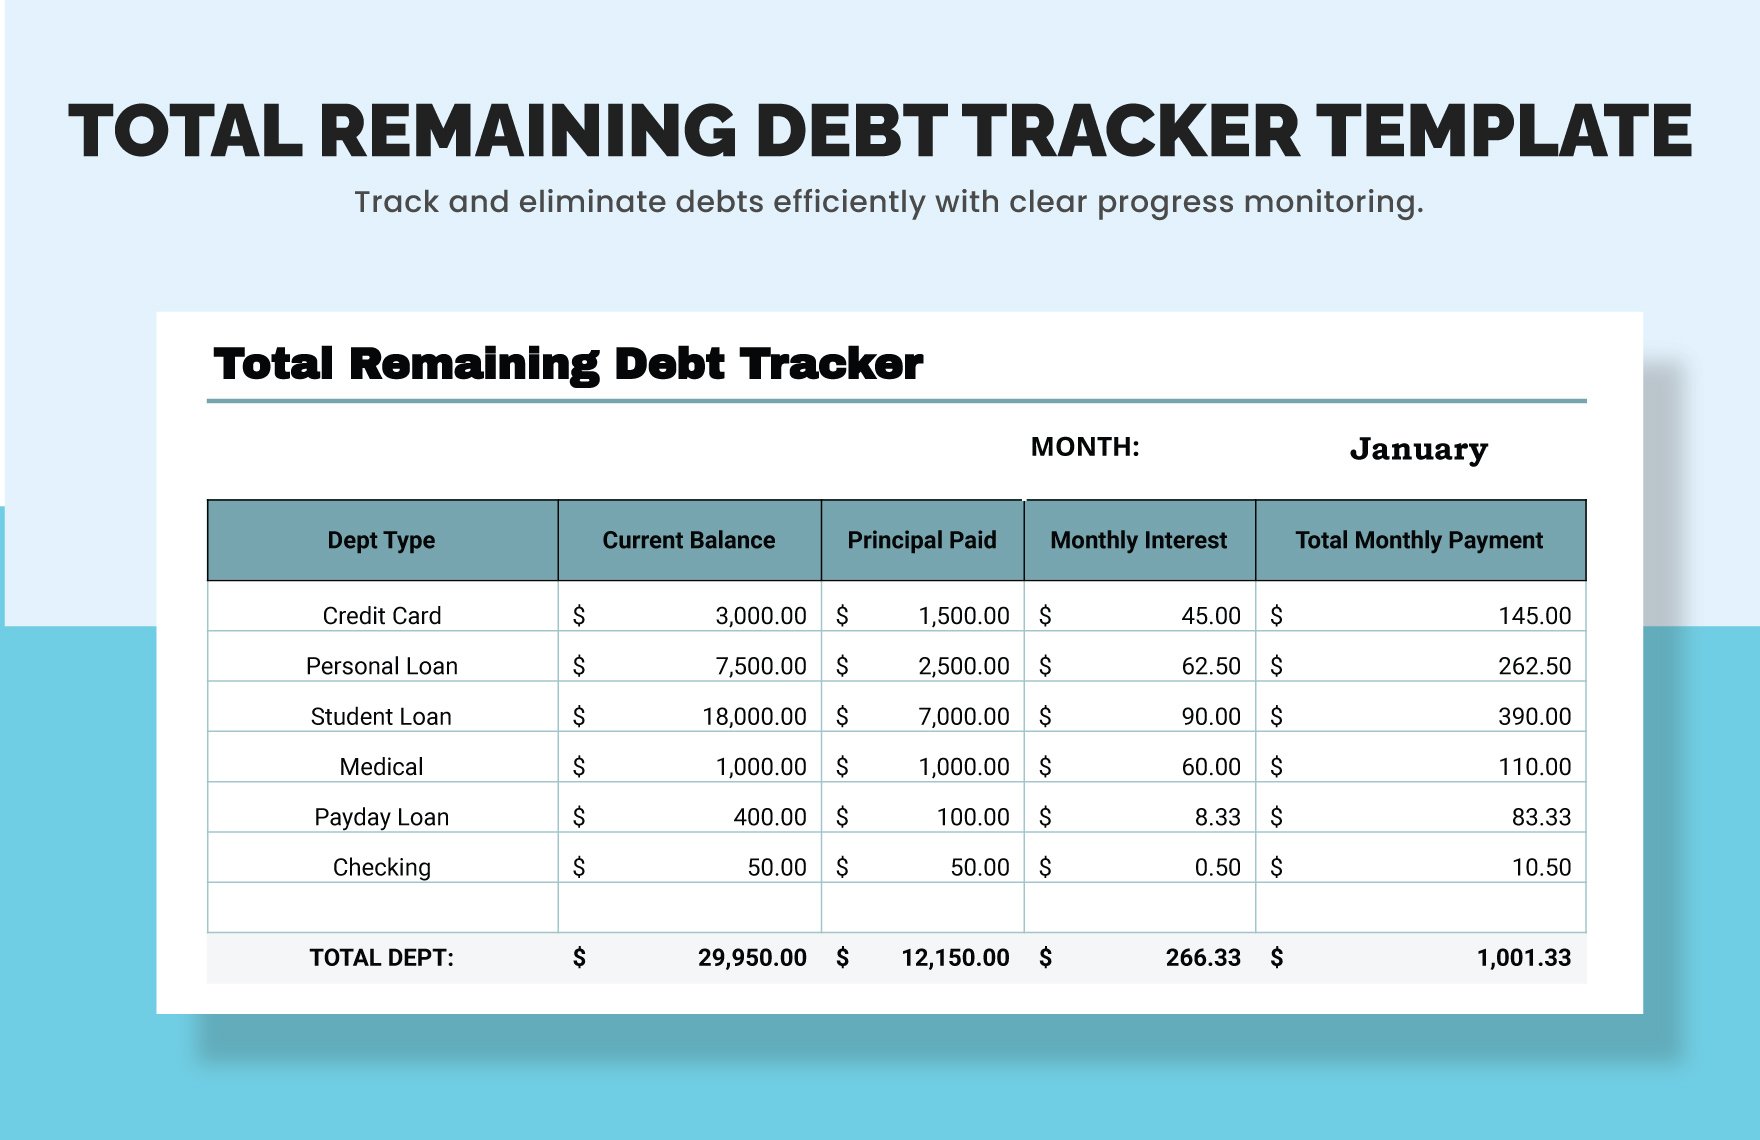 Total Remaining Debt Tracker Template